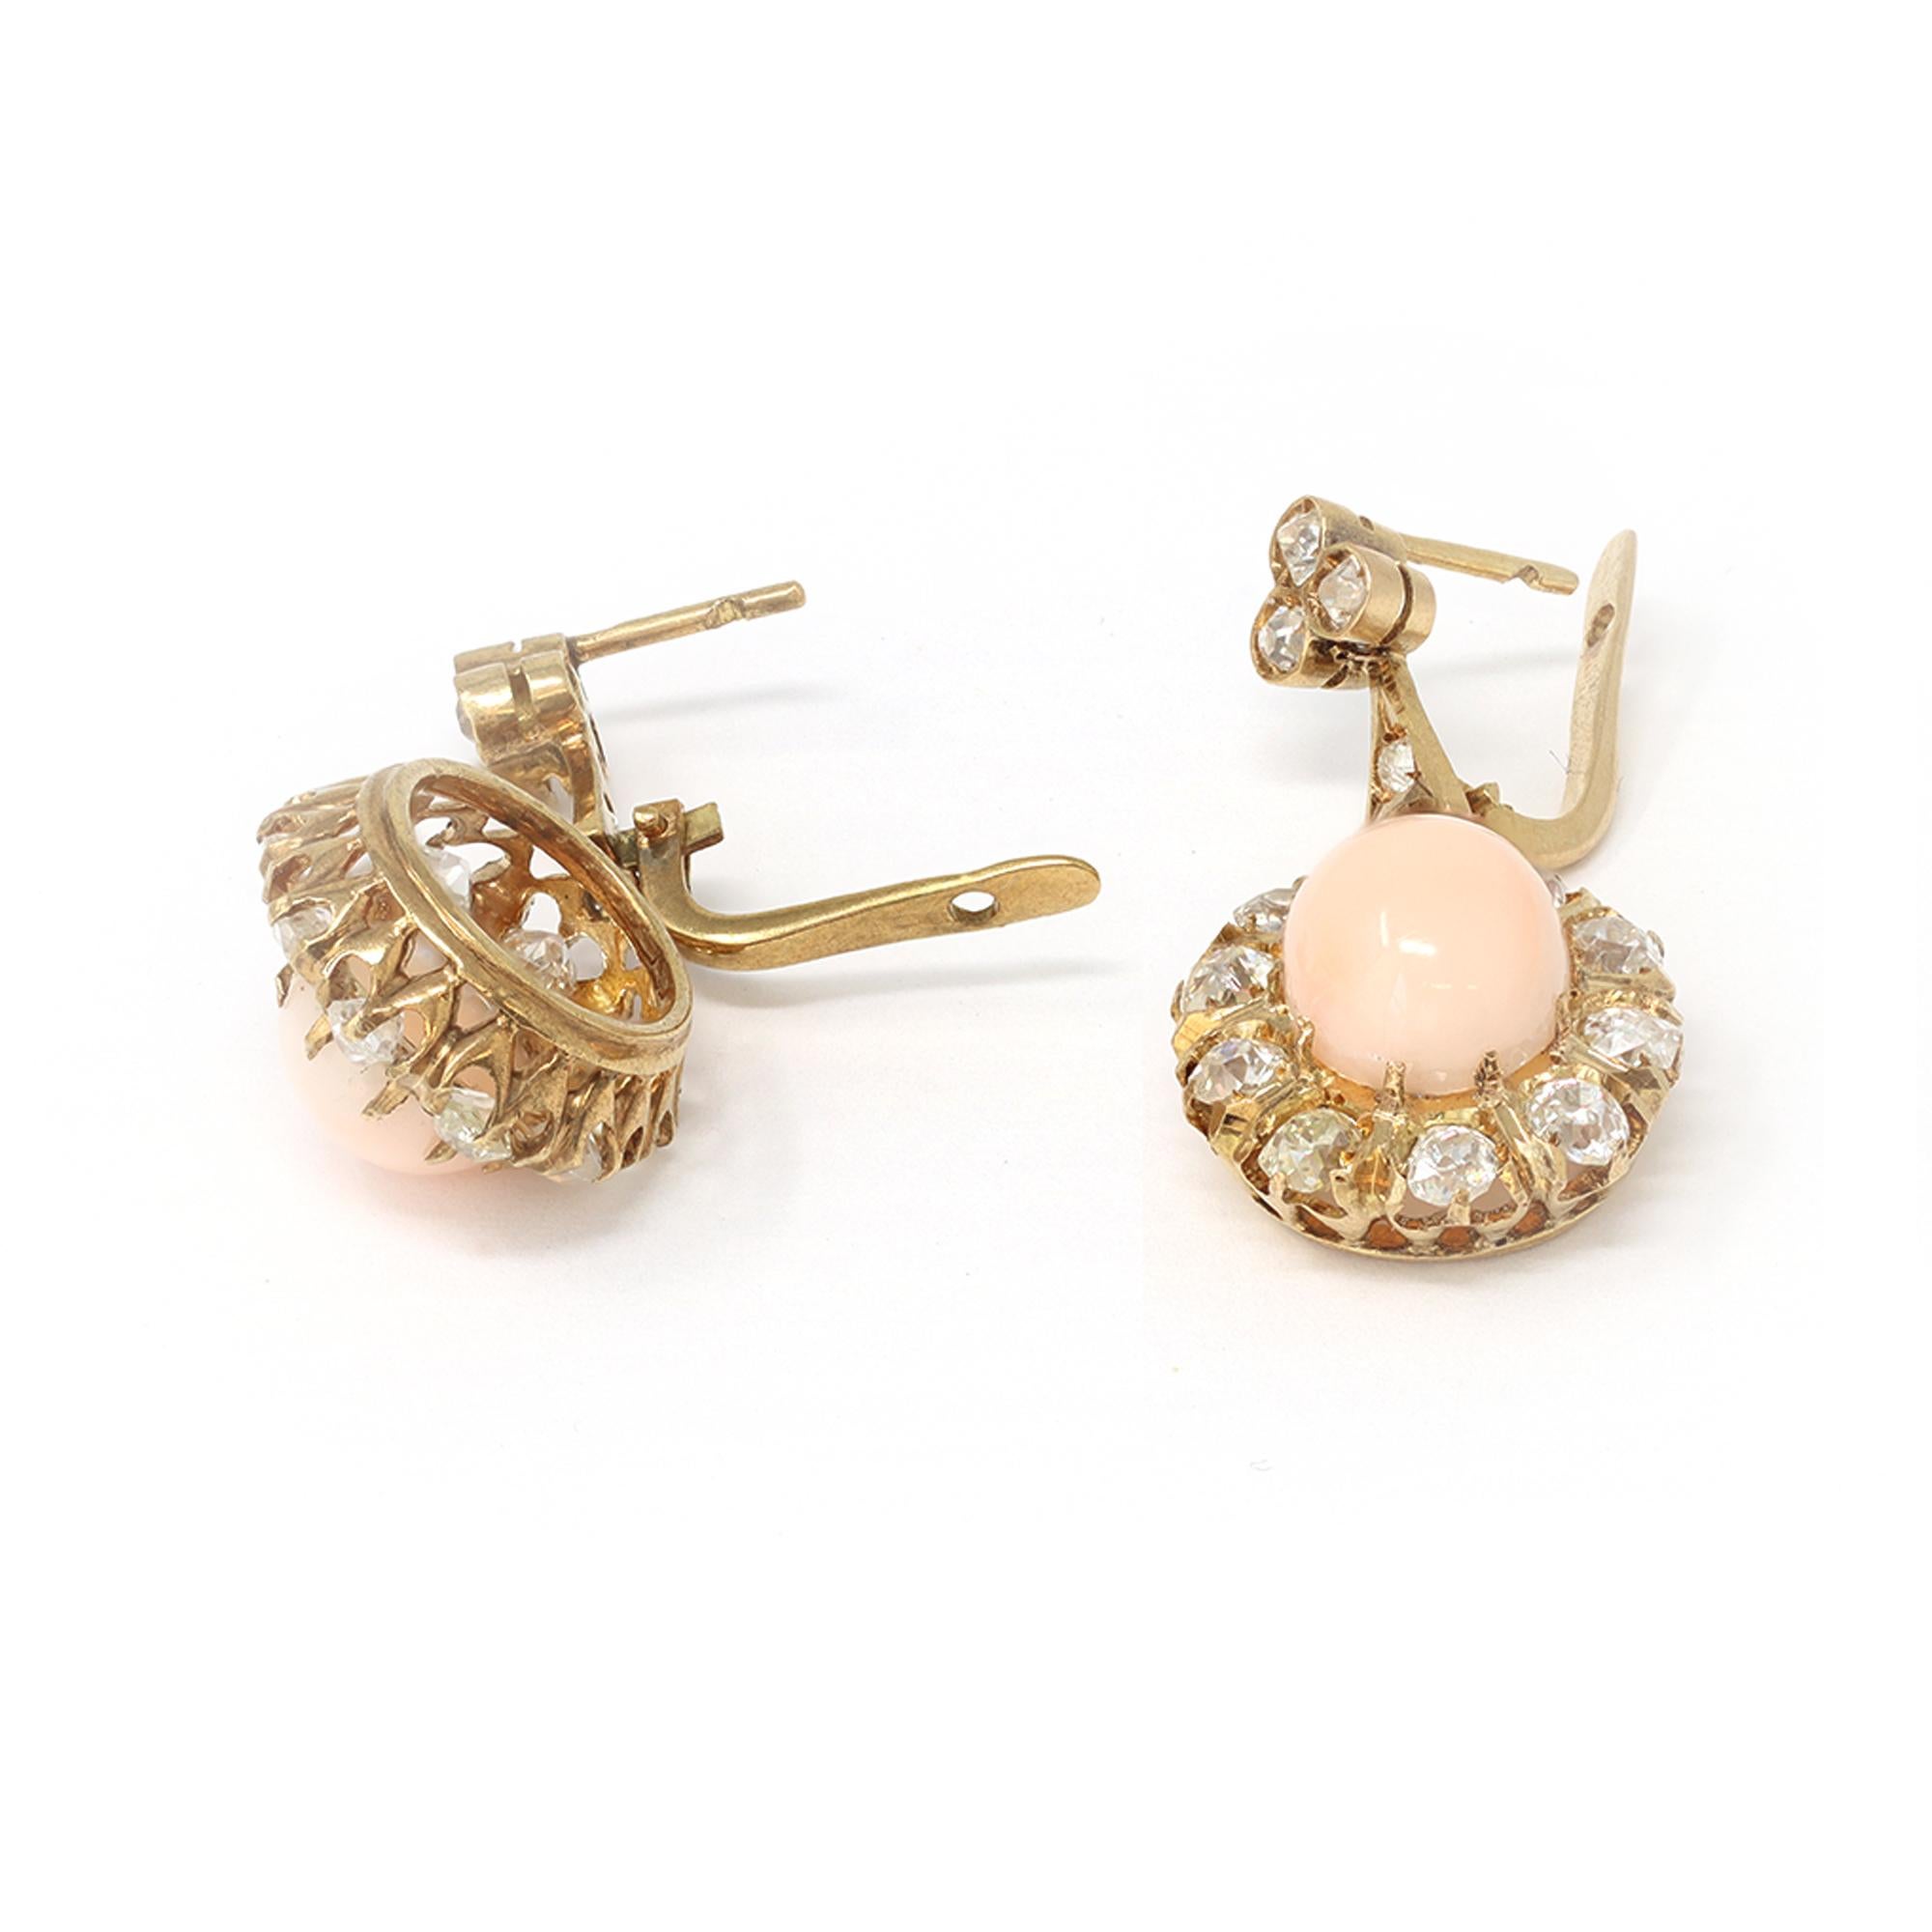 A lovely Victorian era dangling earrings circa 1900 featuring an blush pink AngelSkin Cabochon adorned with an halo of old mine cut diamonds and lever back closure. The earrings are set in 14 karat yellow gold showing some sign of natural oxydation